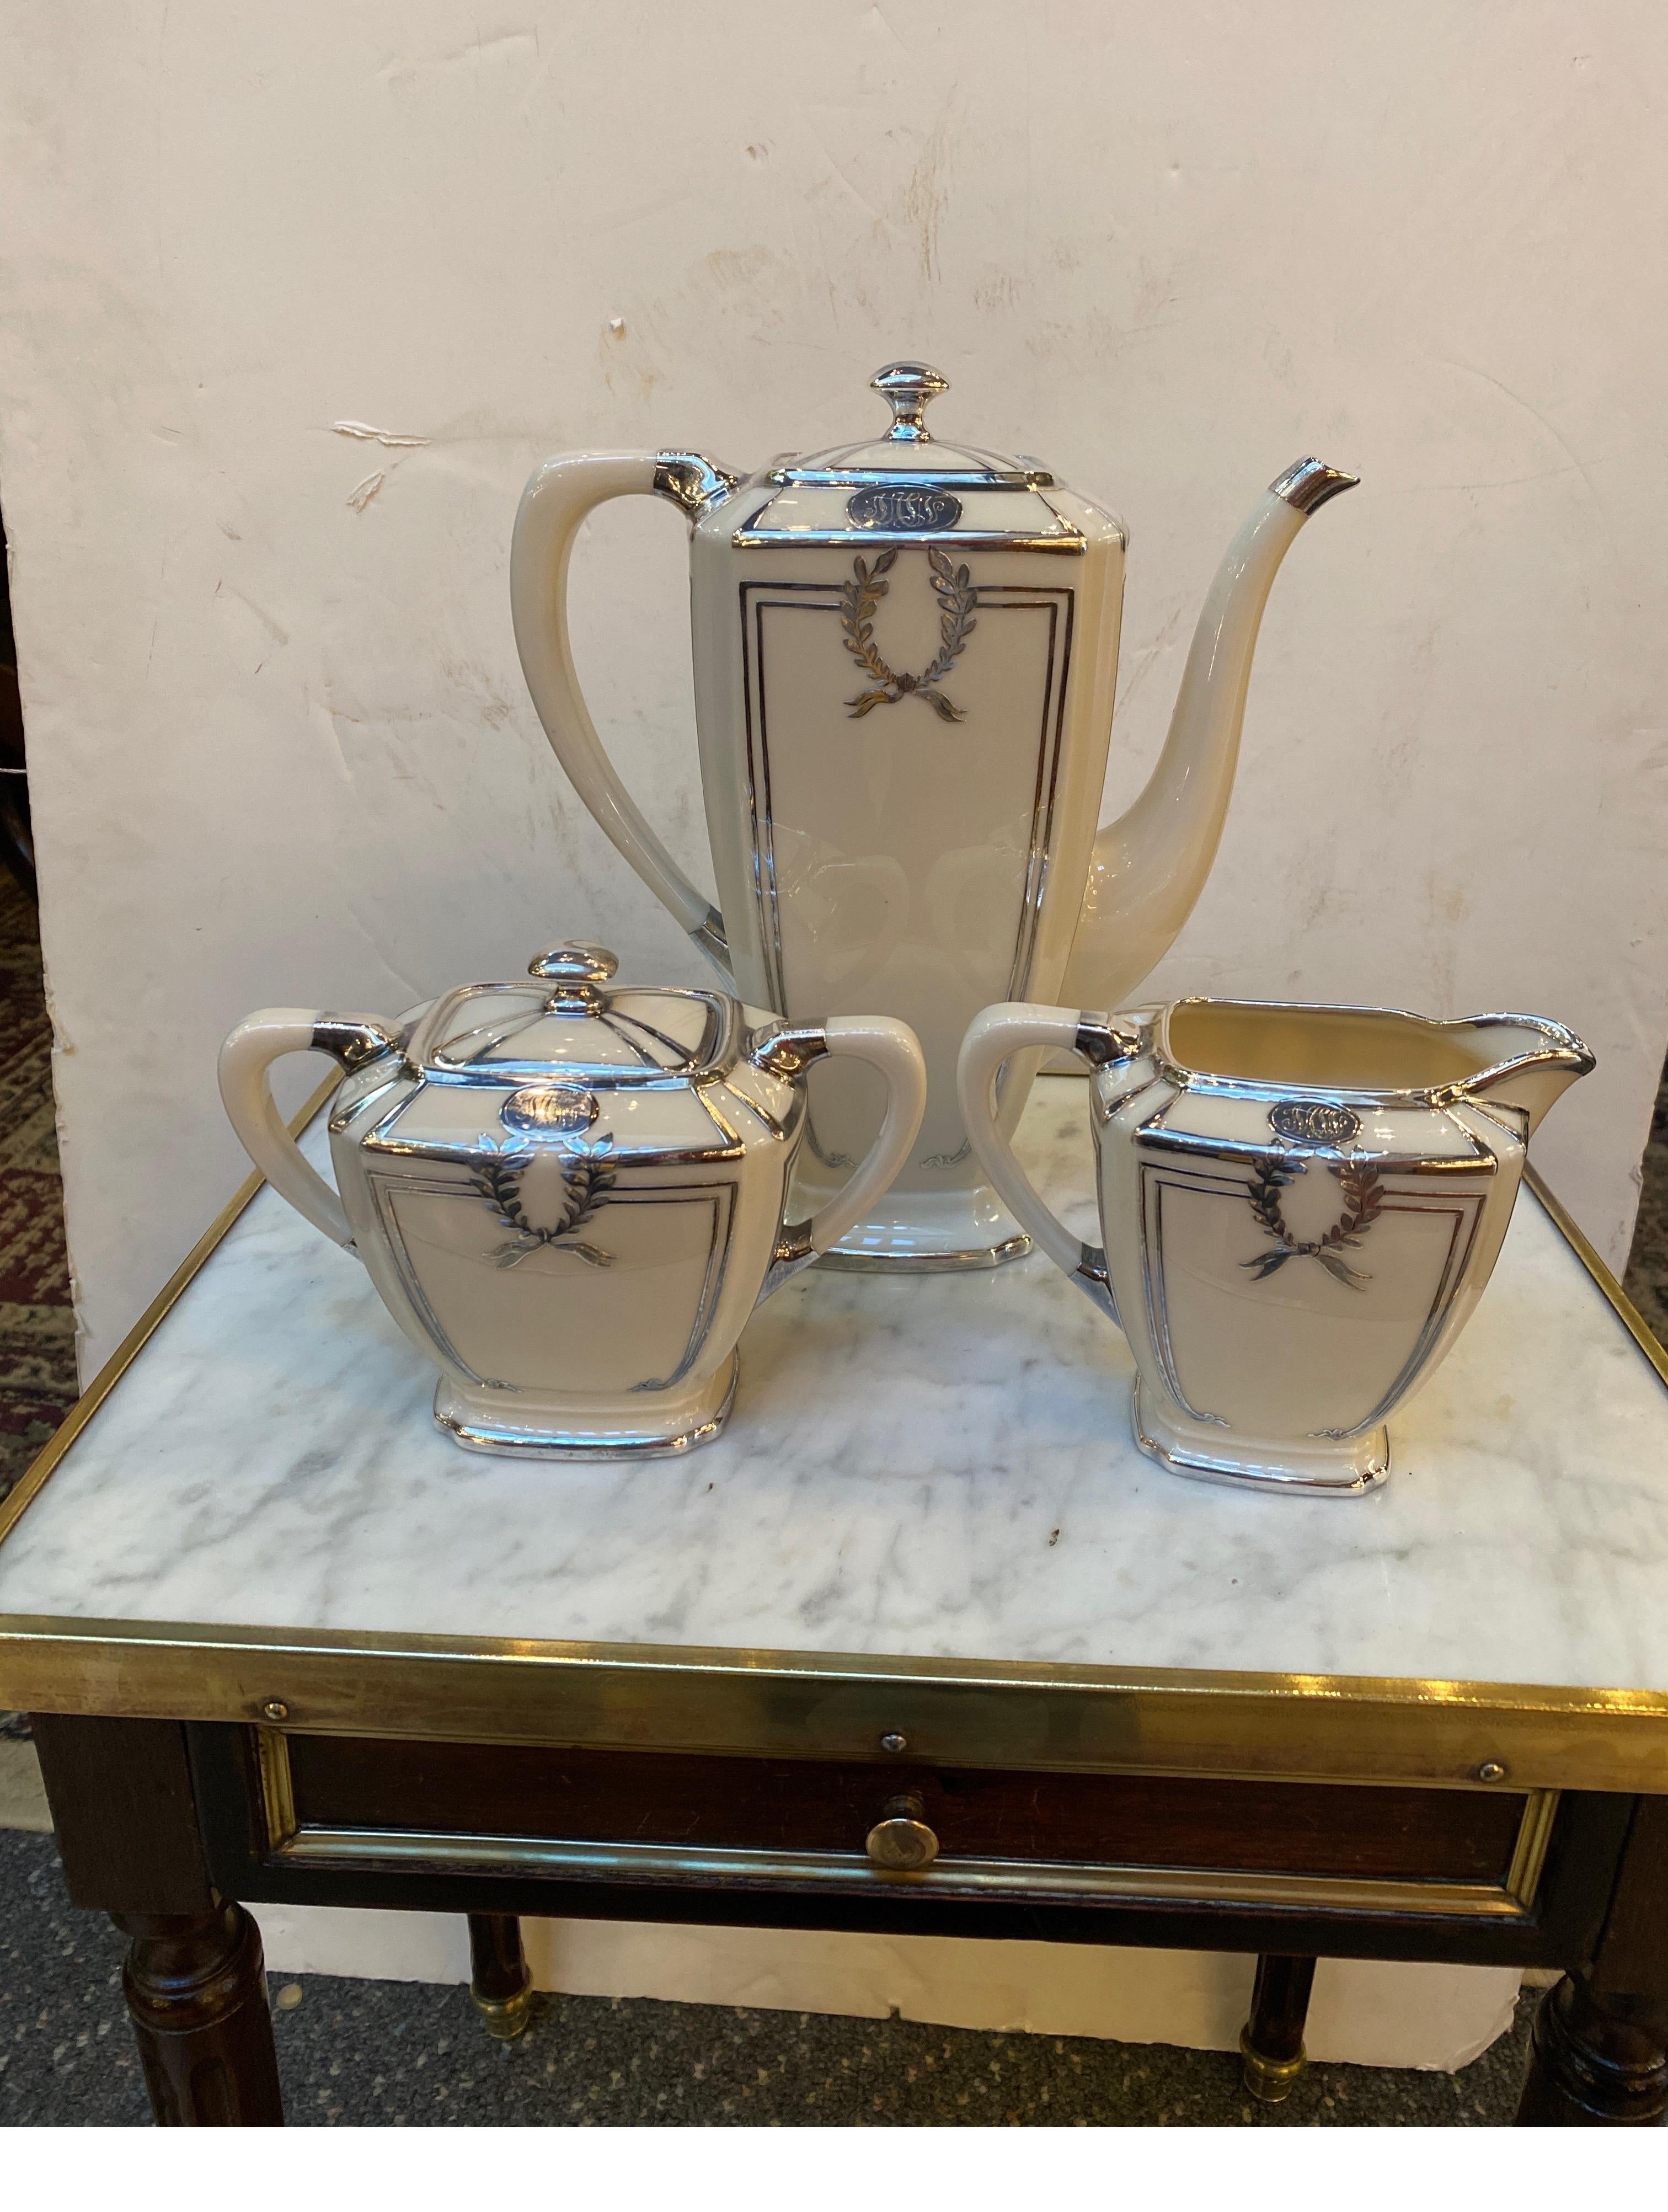 Elegant coffee service with coffeepot, covered sugar and creamer with sterling silver overlay. Made by Lenox Belleek with a green mark on the bottom used from 1896 till 1905.